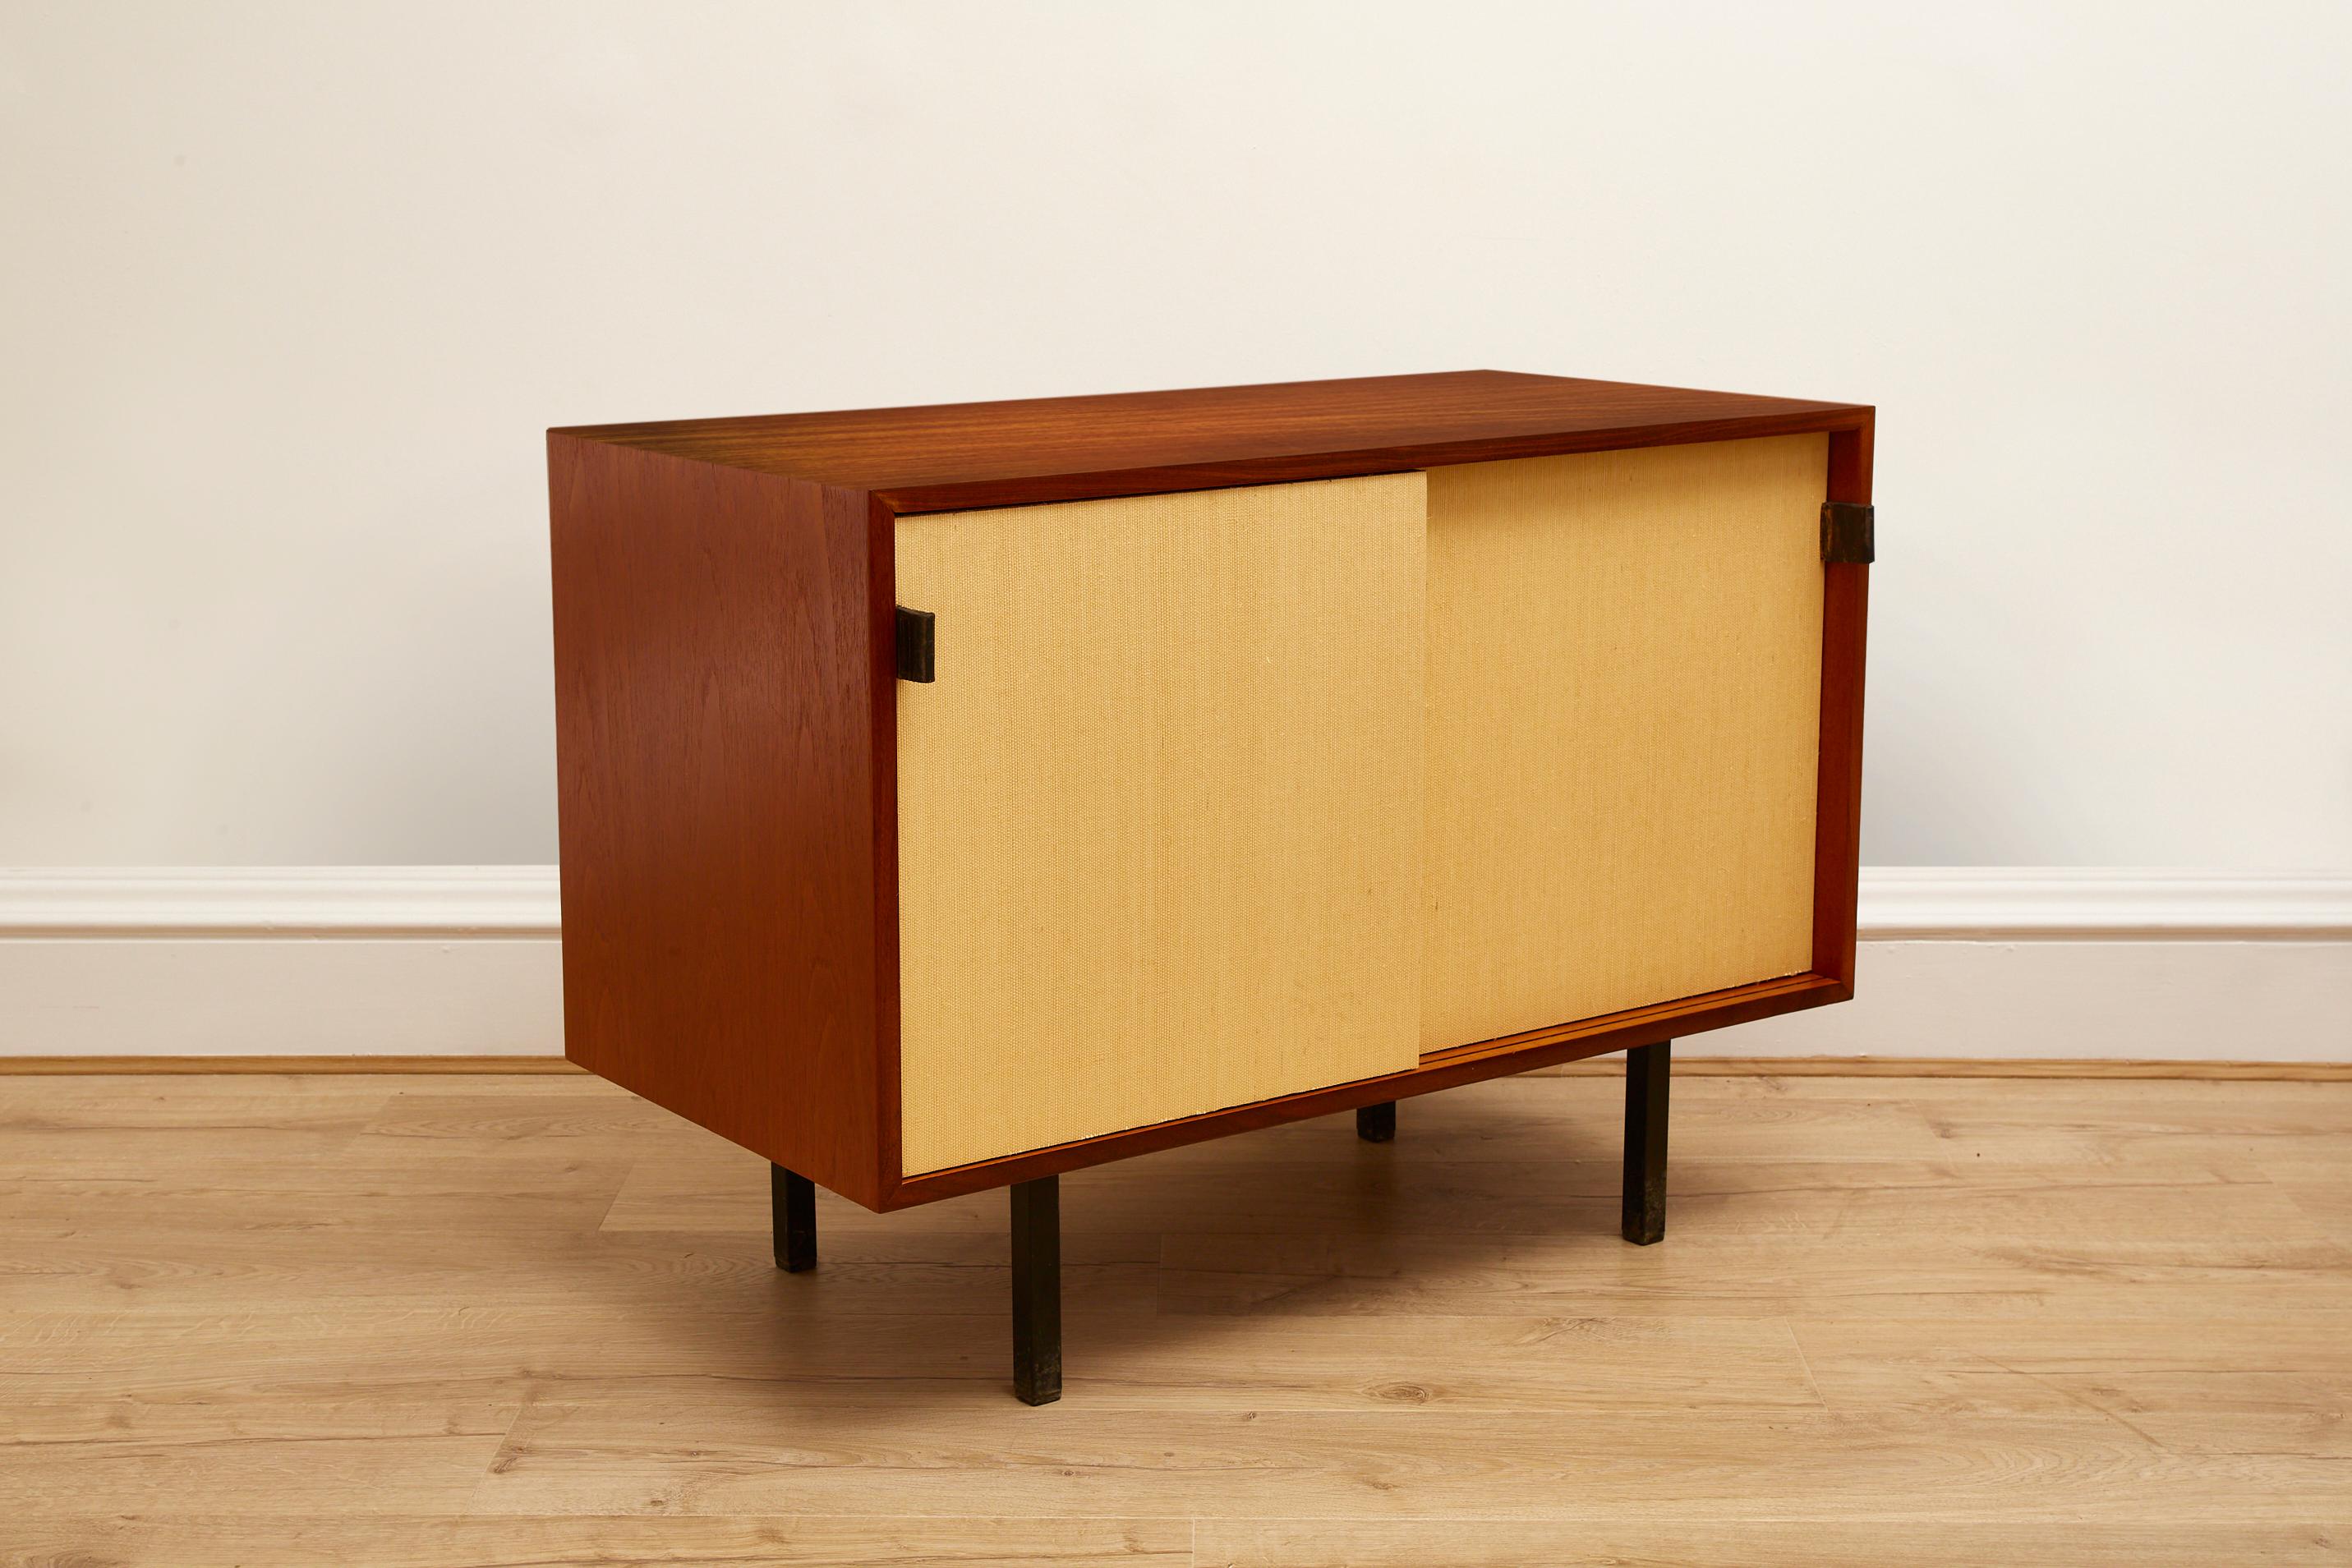 Enhance your living space with a true rare mid-century modern gem – a Teakwood and Seagrass Two Door Cabinet designed by Florence Knoll, crafted by Knoll International in the 1960's. 

This iconic piece of furniture encapsulates the design ethos of